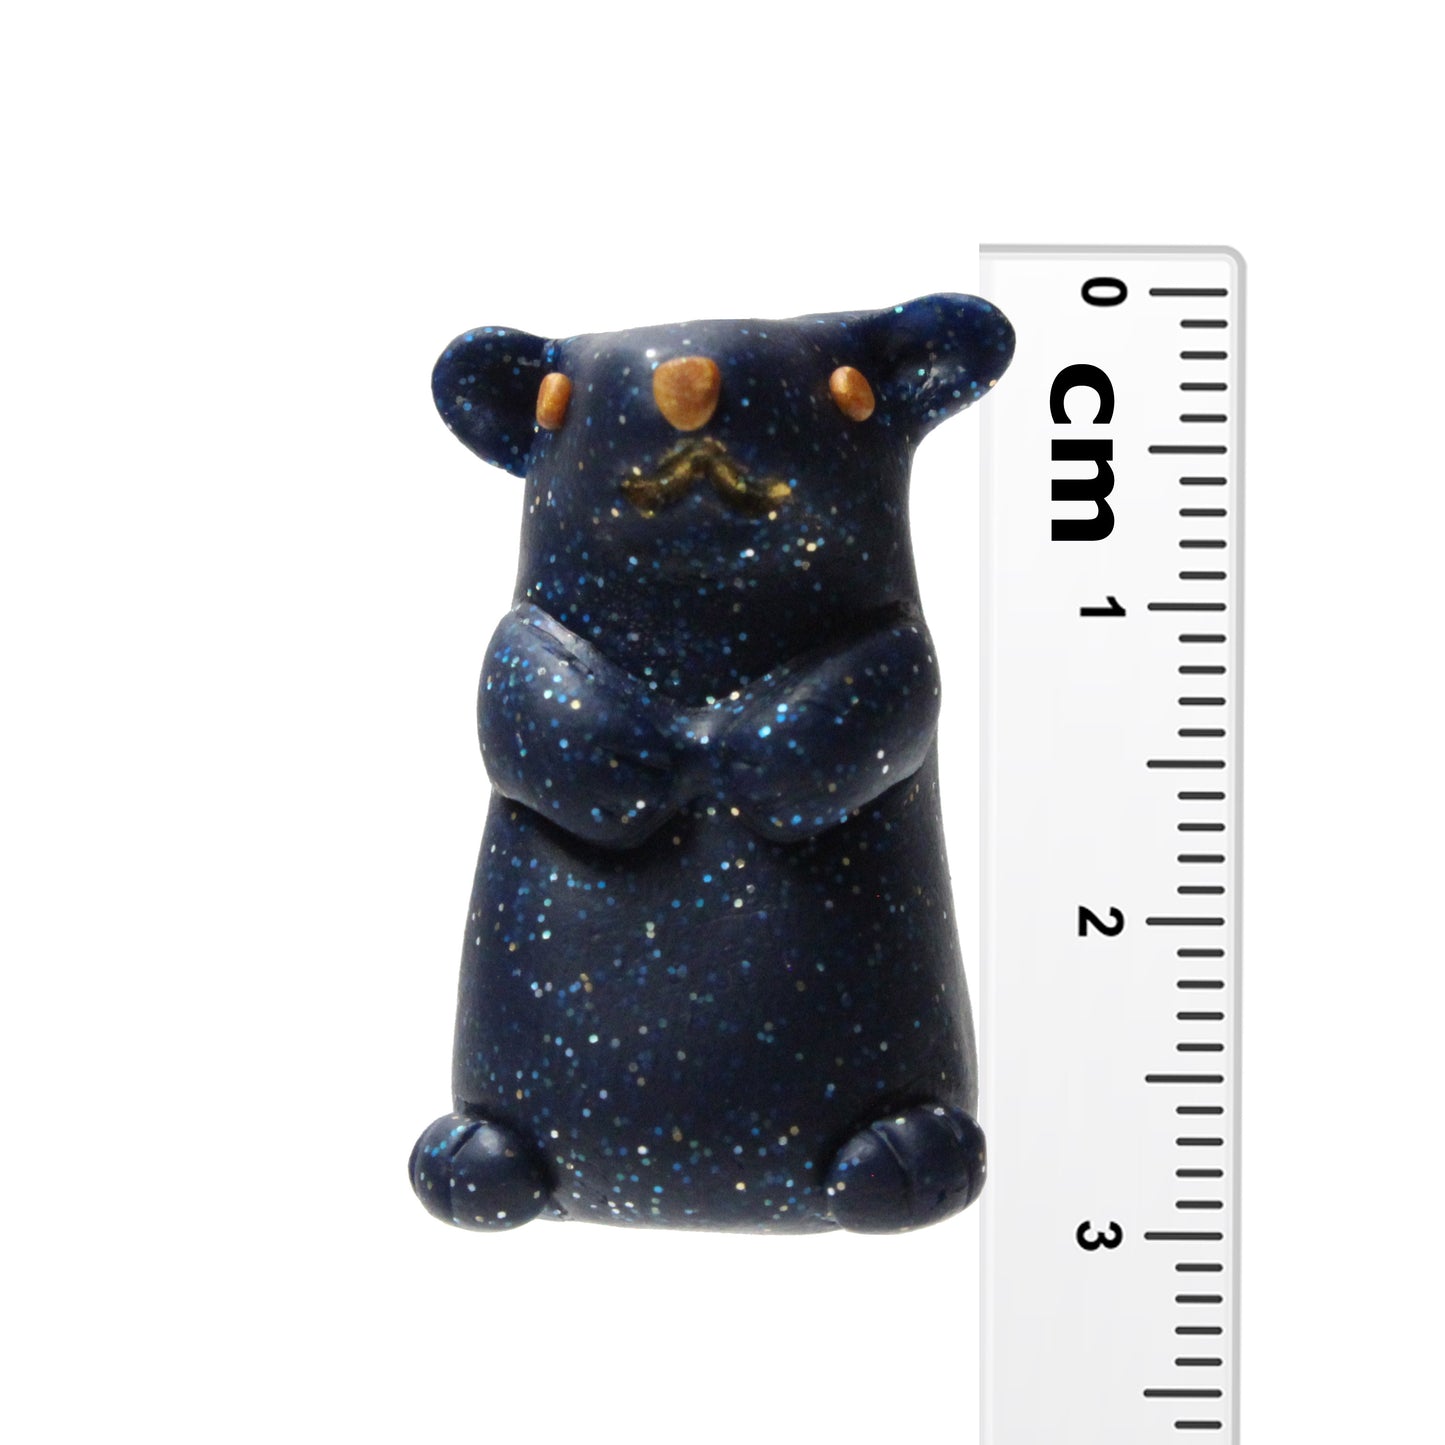 GALAXY Hamster / hand sculpted polymer clay / choose from figurine, charm or keychain